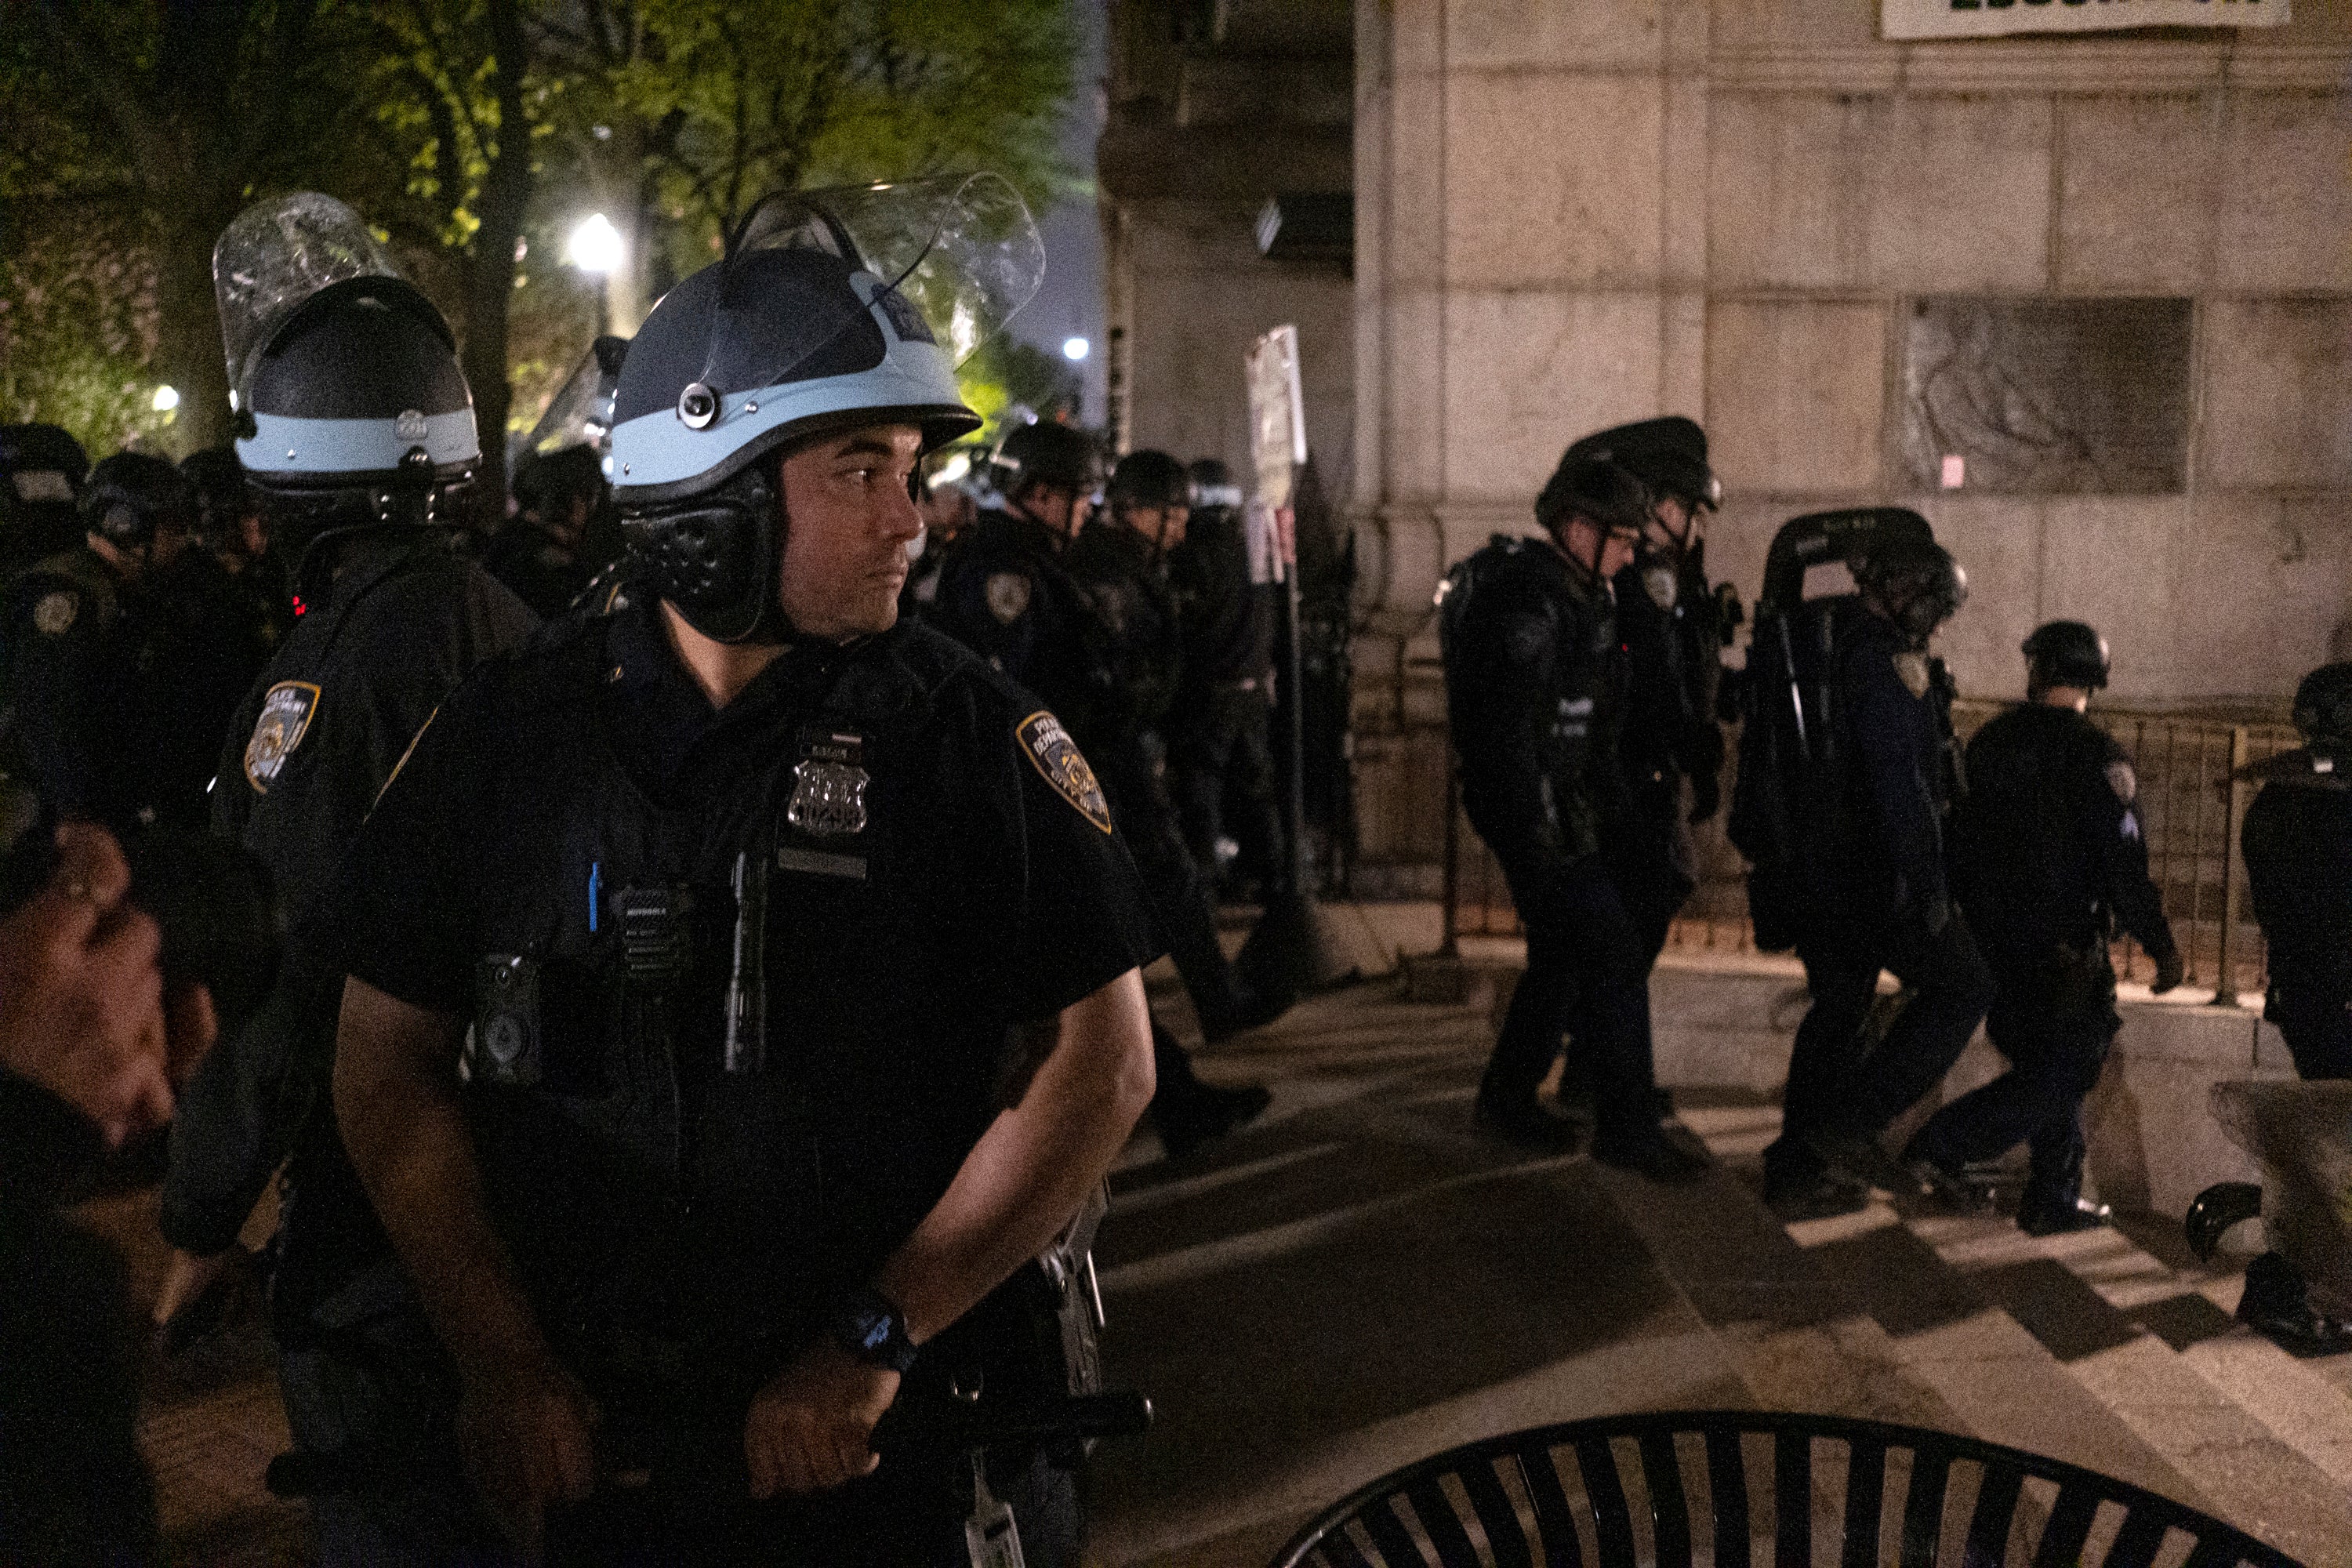 NYPD officers, pictured on Tuesday night, removed protesters occupying Columbia University’s Hamilton Hall. Mayor Eric Adams says the Gaza protests and building occupation were fueled by ‘outside agitators’